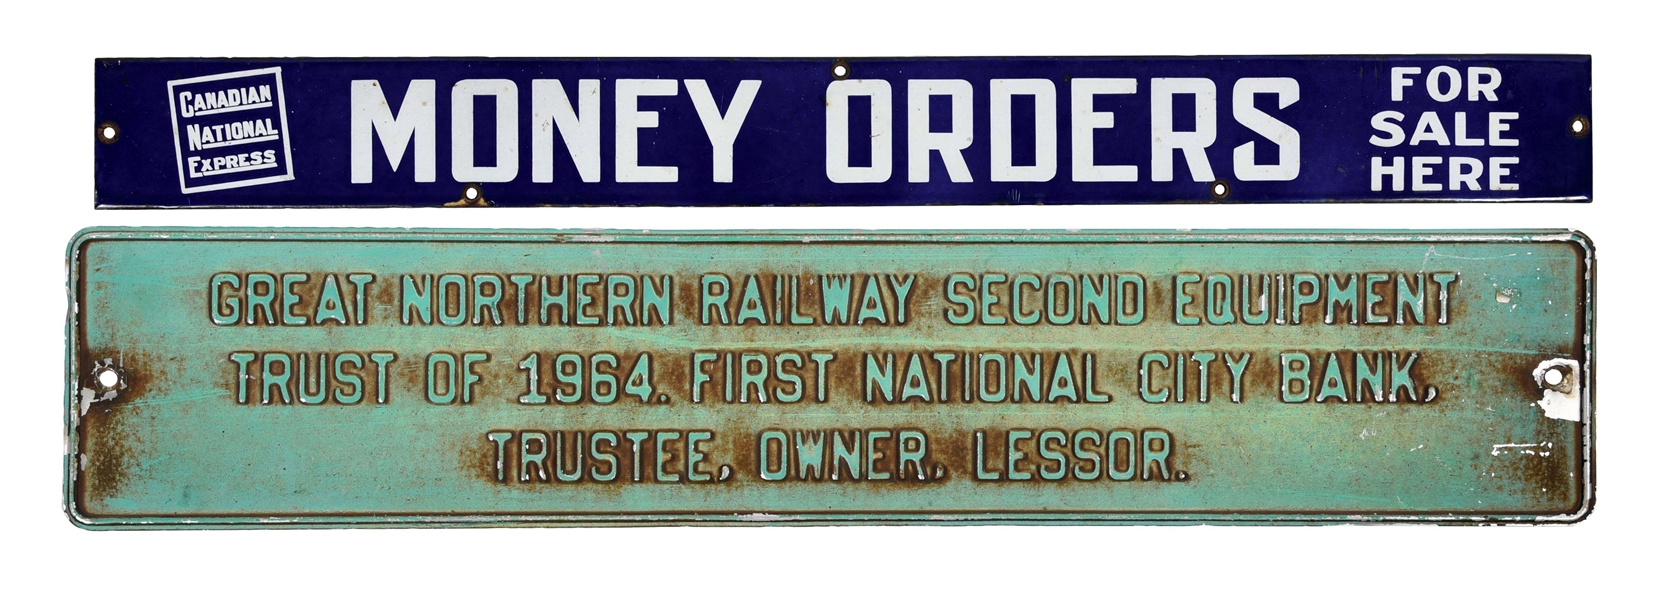 LOT OF 2: CANADIAN NATIONAL EXPRESS MONEY ORDERS PORCELAIN STRIP SIGN & GREAT NORTHERN RAILWAY EMBOSSED TIN SIGN. 